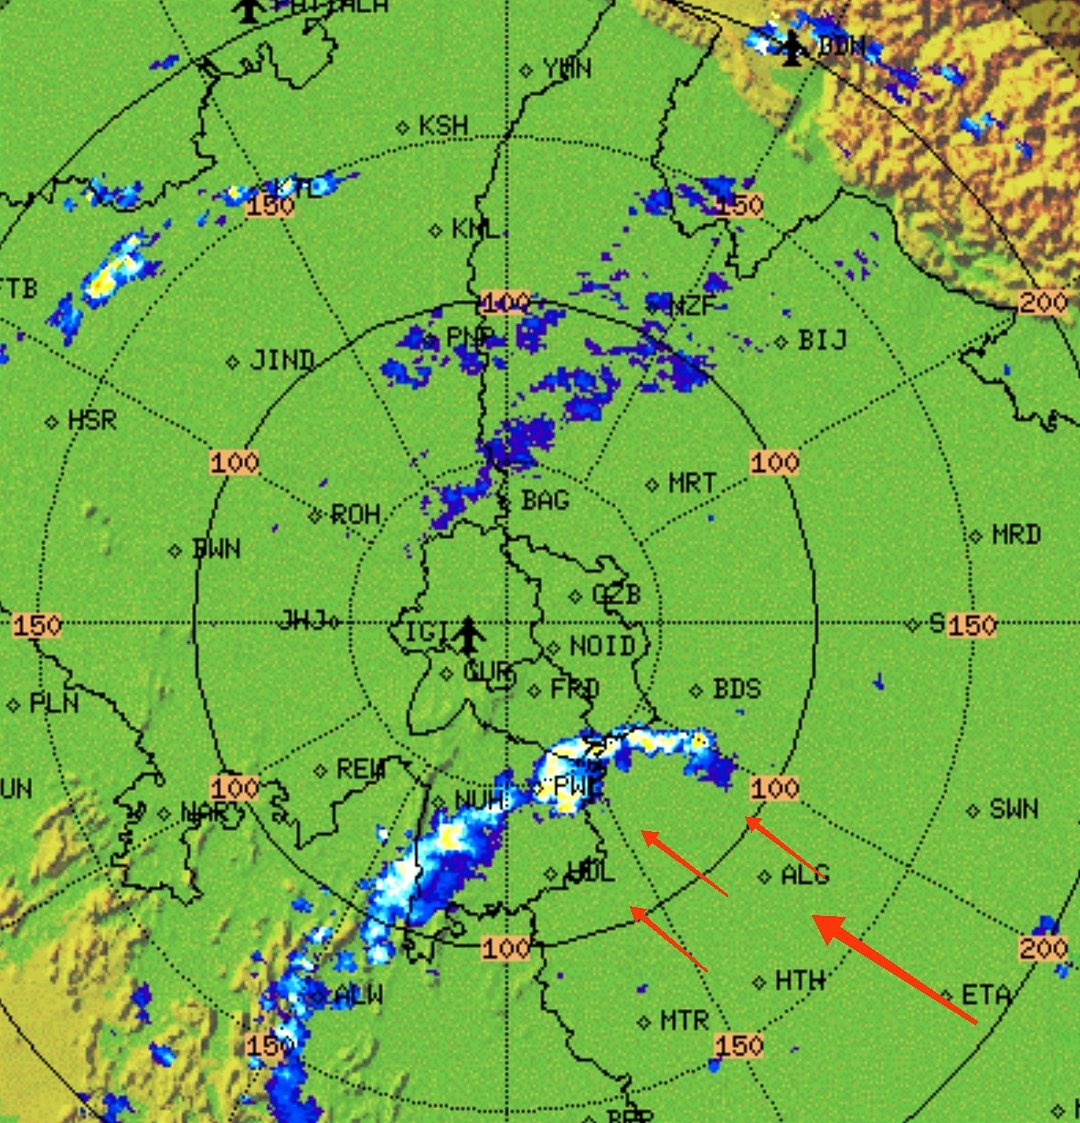 Nowcast- 1  ( 1:47 PM ) Thunderstorms Alert in Parts of Delhi NCR.

Moderate to intense ThunderShower expected in Faridabad, Gurgaon, and few places in Delhi during the next 1 hour. ⛈️

#CycloneBiparjoy #DelhiRains